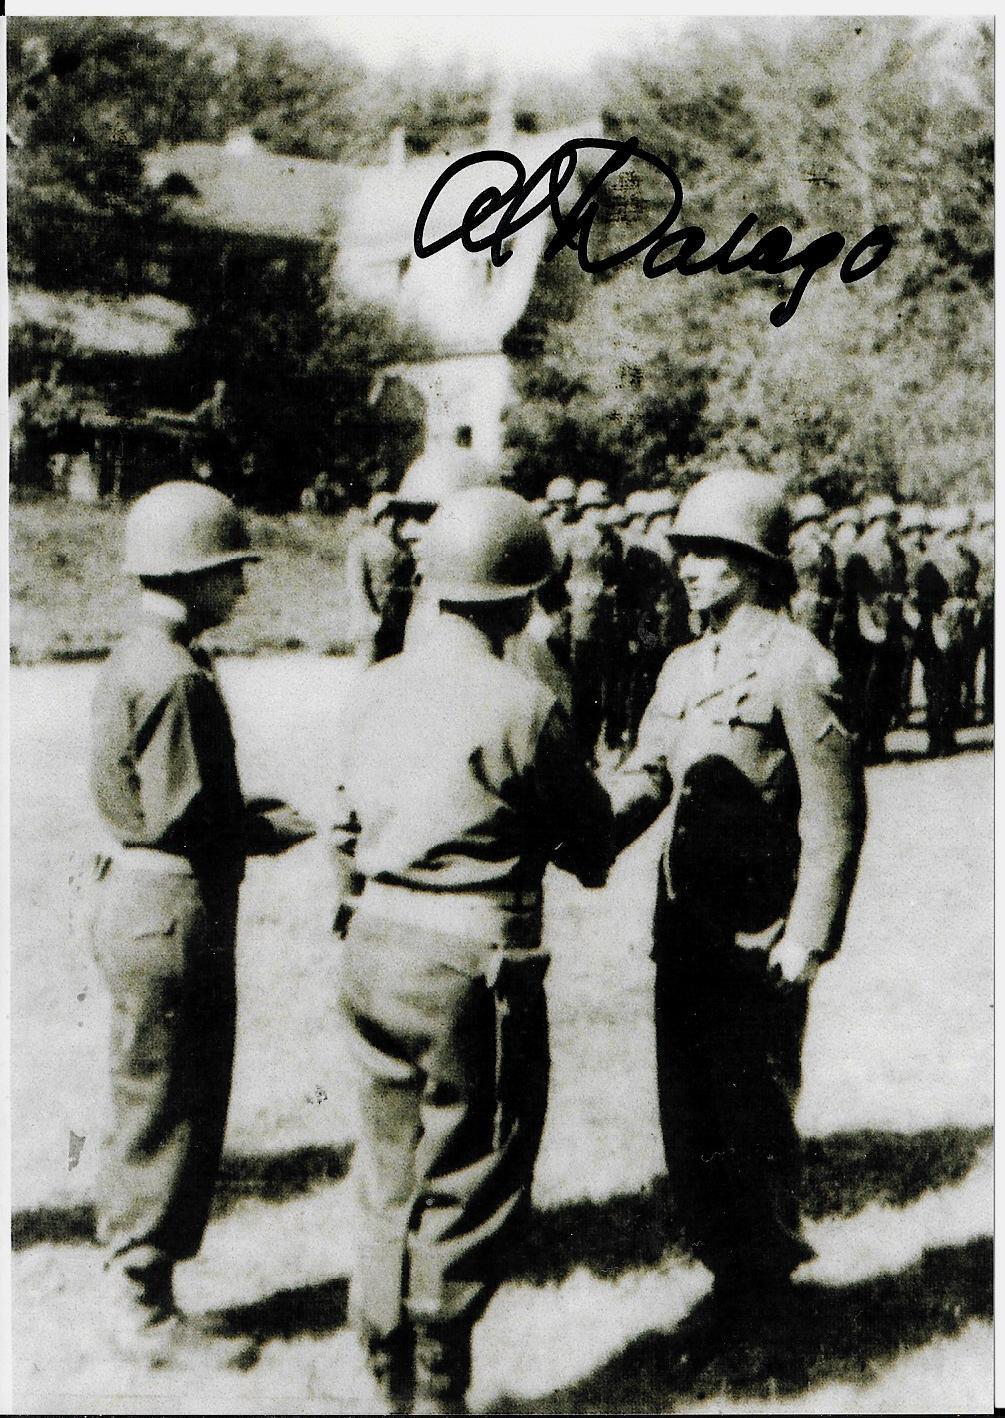 AL DARAGO BATTLE OF THE BULGE DISTINGUISHED SERVICE CROSS RECIPIENT SIGNED Photo Poster painting